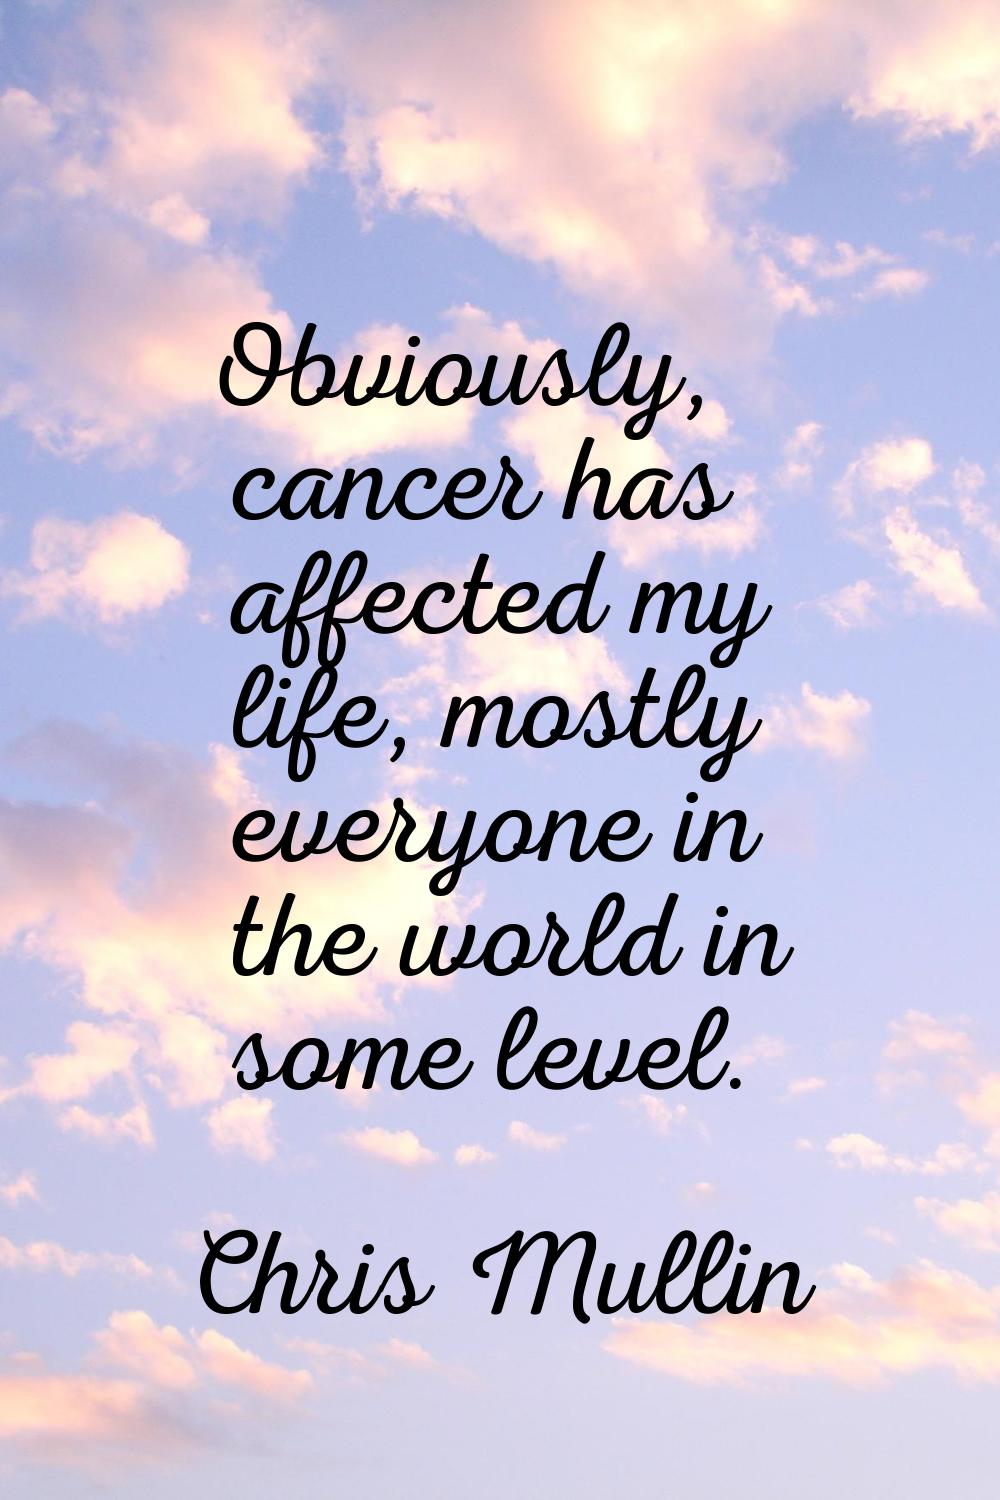 Obviously, cancer has affected my life, mostly everyone in the world in some level.